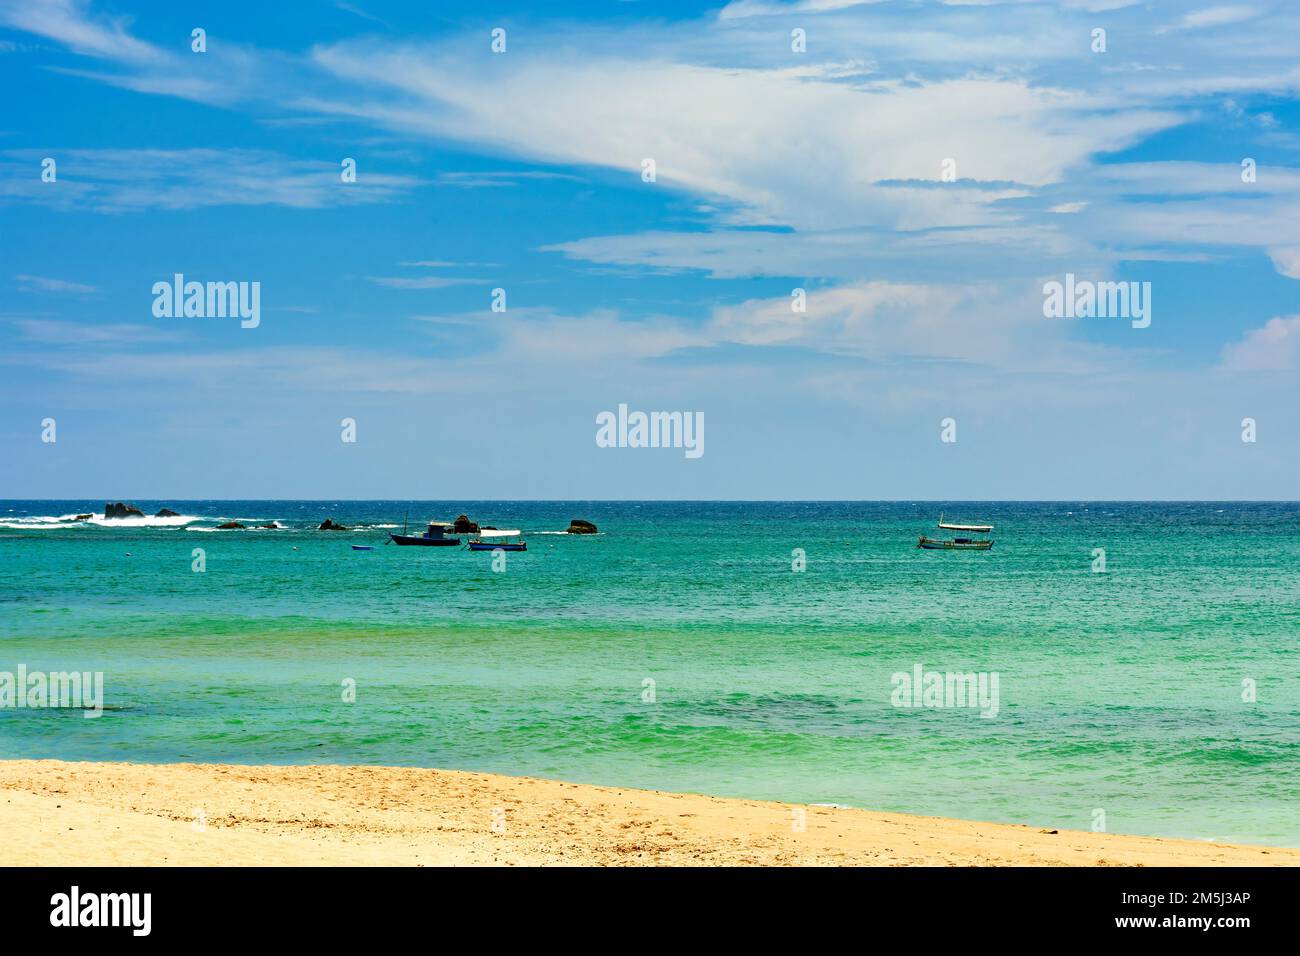 Wooden fishing boats on the colorful waters of Itapua beach in Salvador, Bahia with rocks and waves in the background Stock Photo